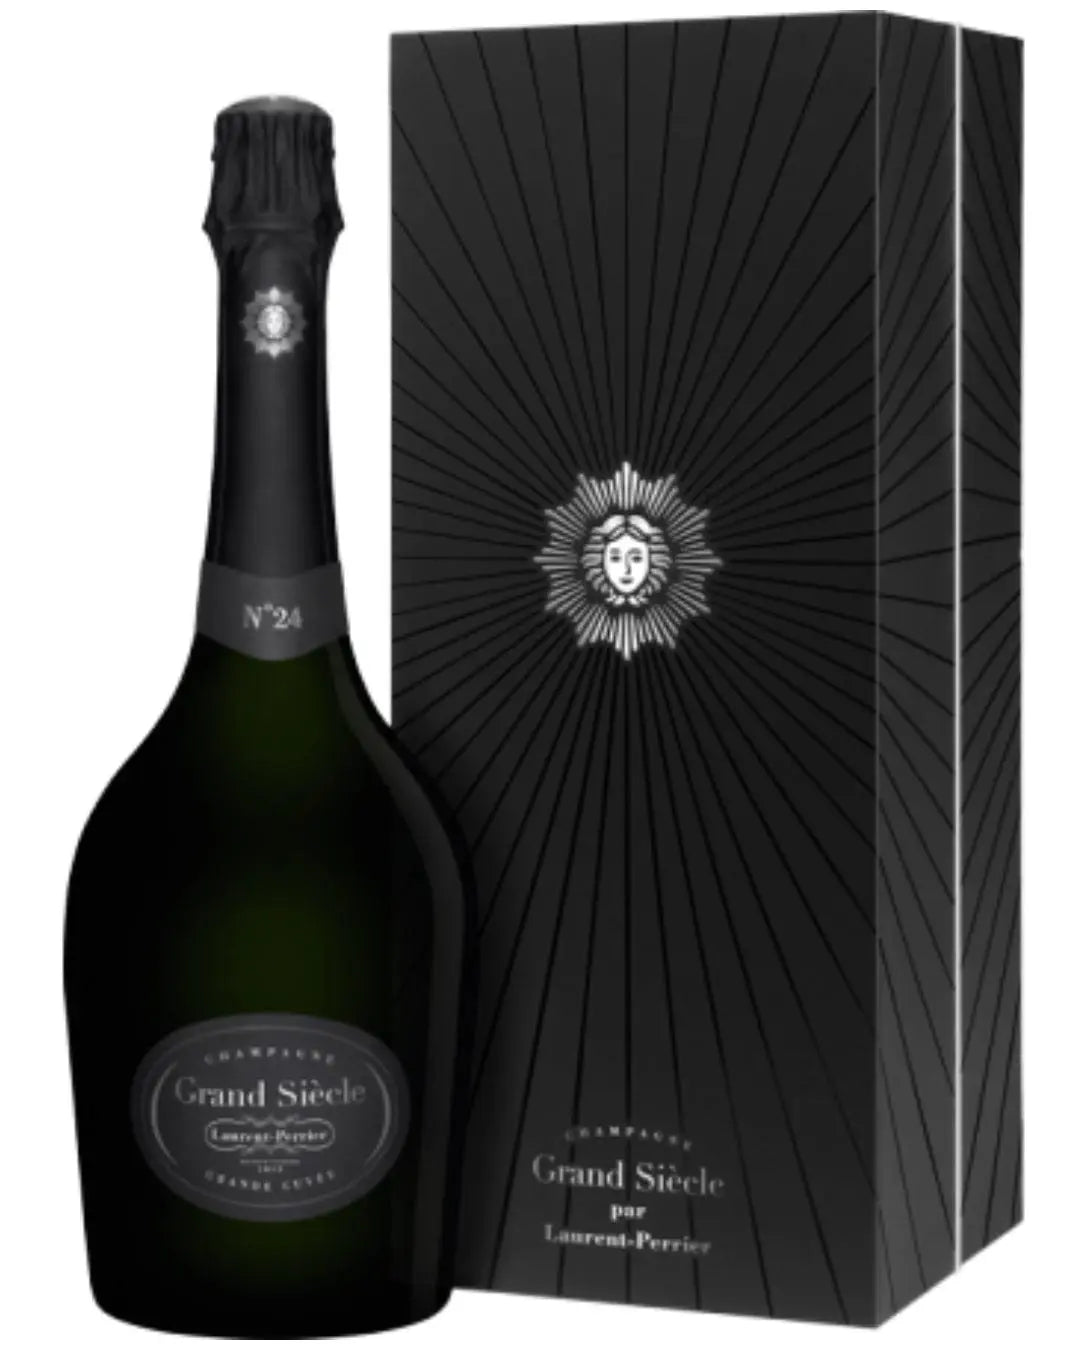 Laurent-Perrier Grande Siecle No 24 in Gift Box, 75 cl Champagne & Sparkling